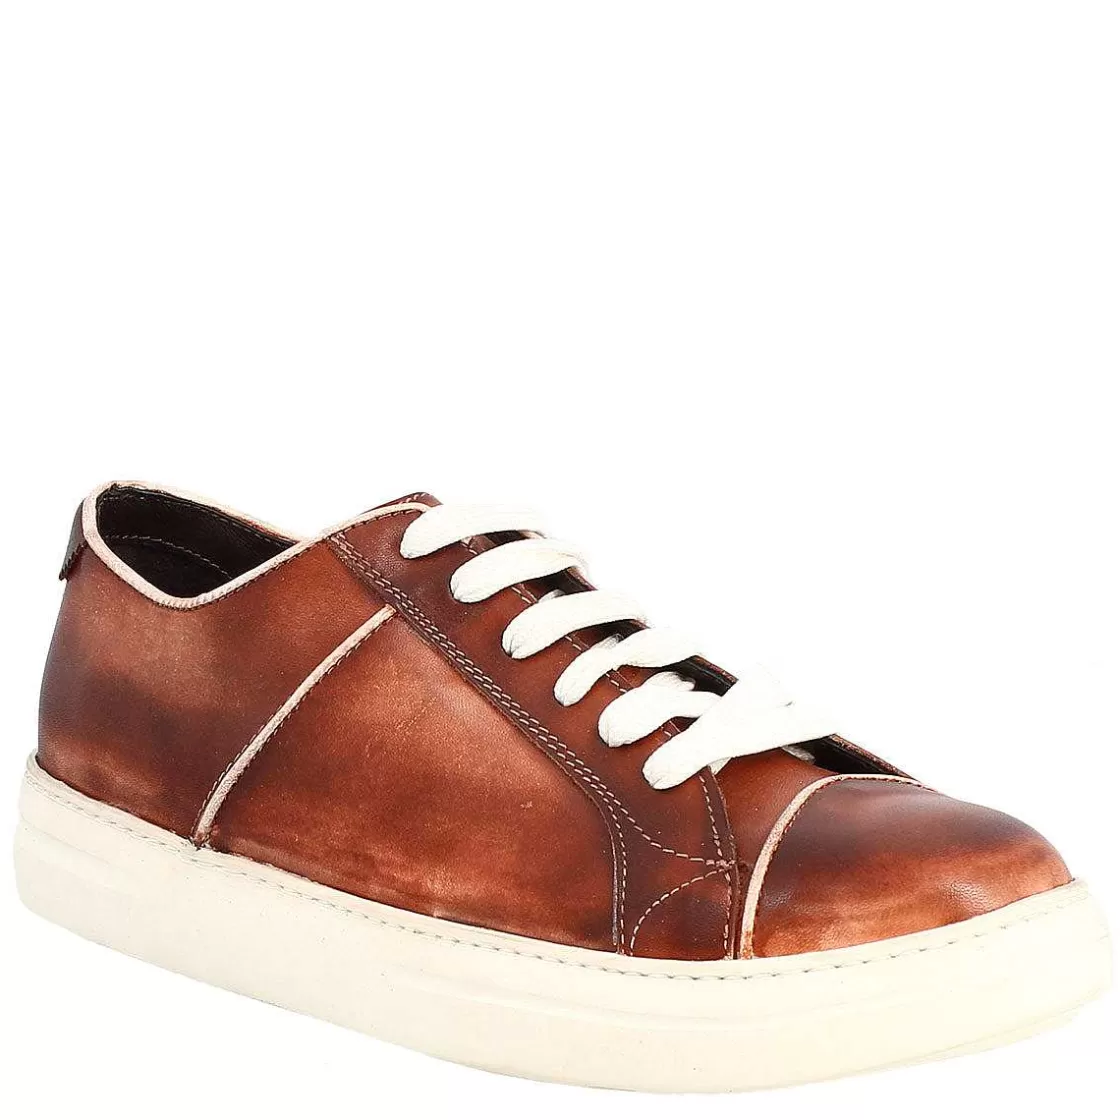 Leonardo Men'S Vintage Brown Leather Sneakers Made And Colored By Hand Shop